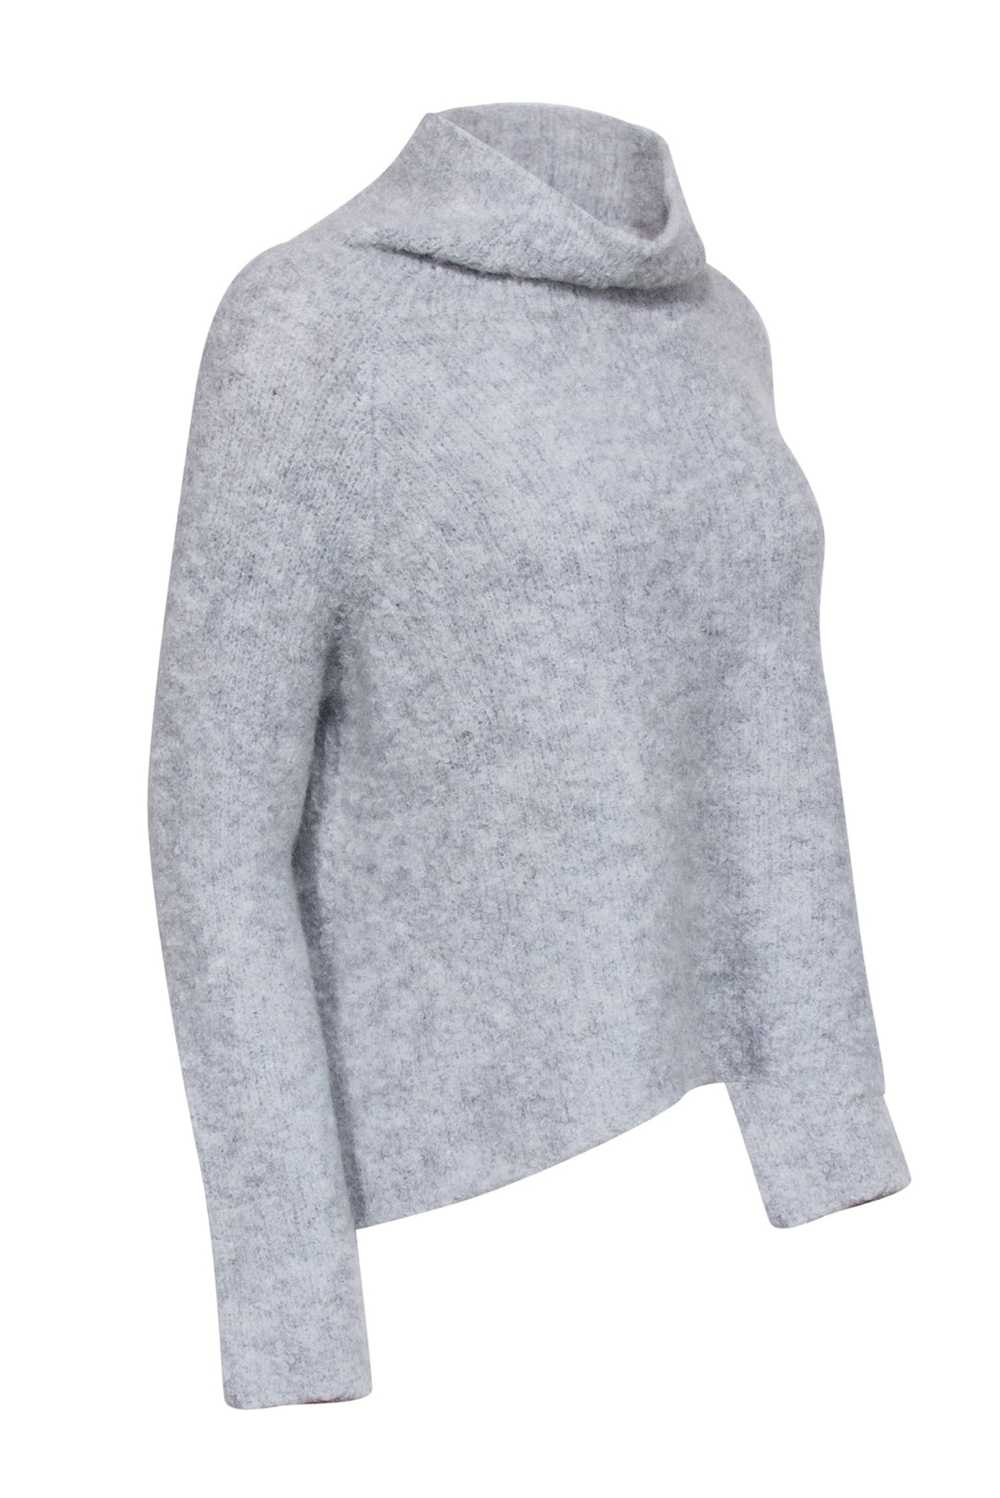 Rebecca Taylor - Grey Mohair Blend Turtle Neck Sw… - image 2